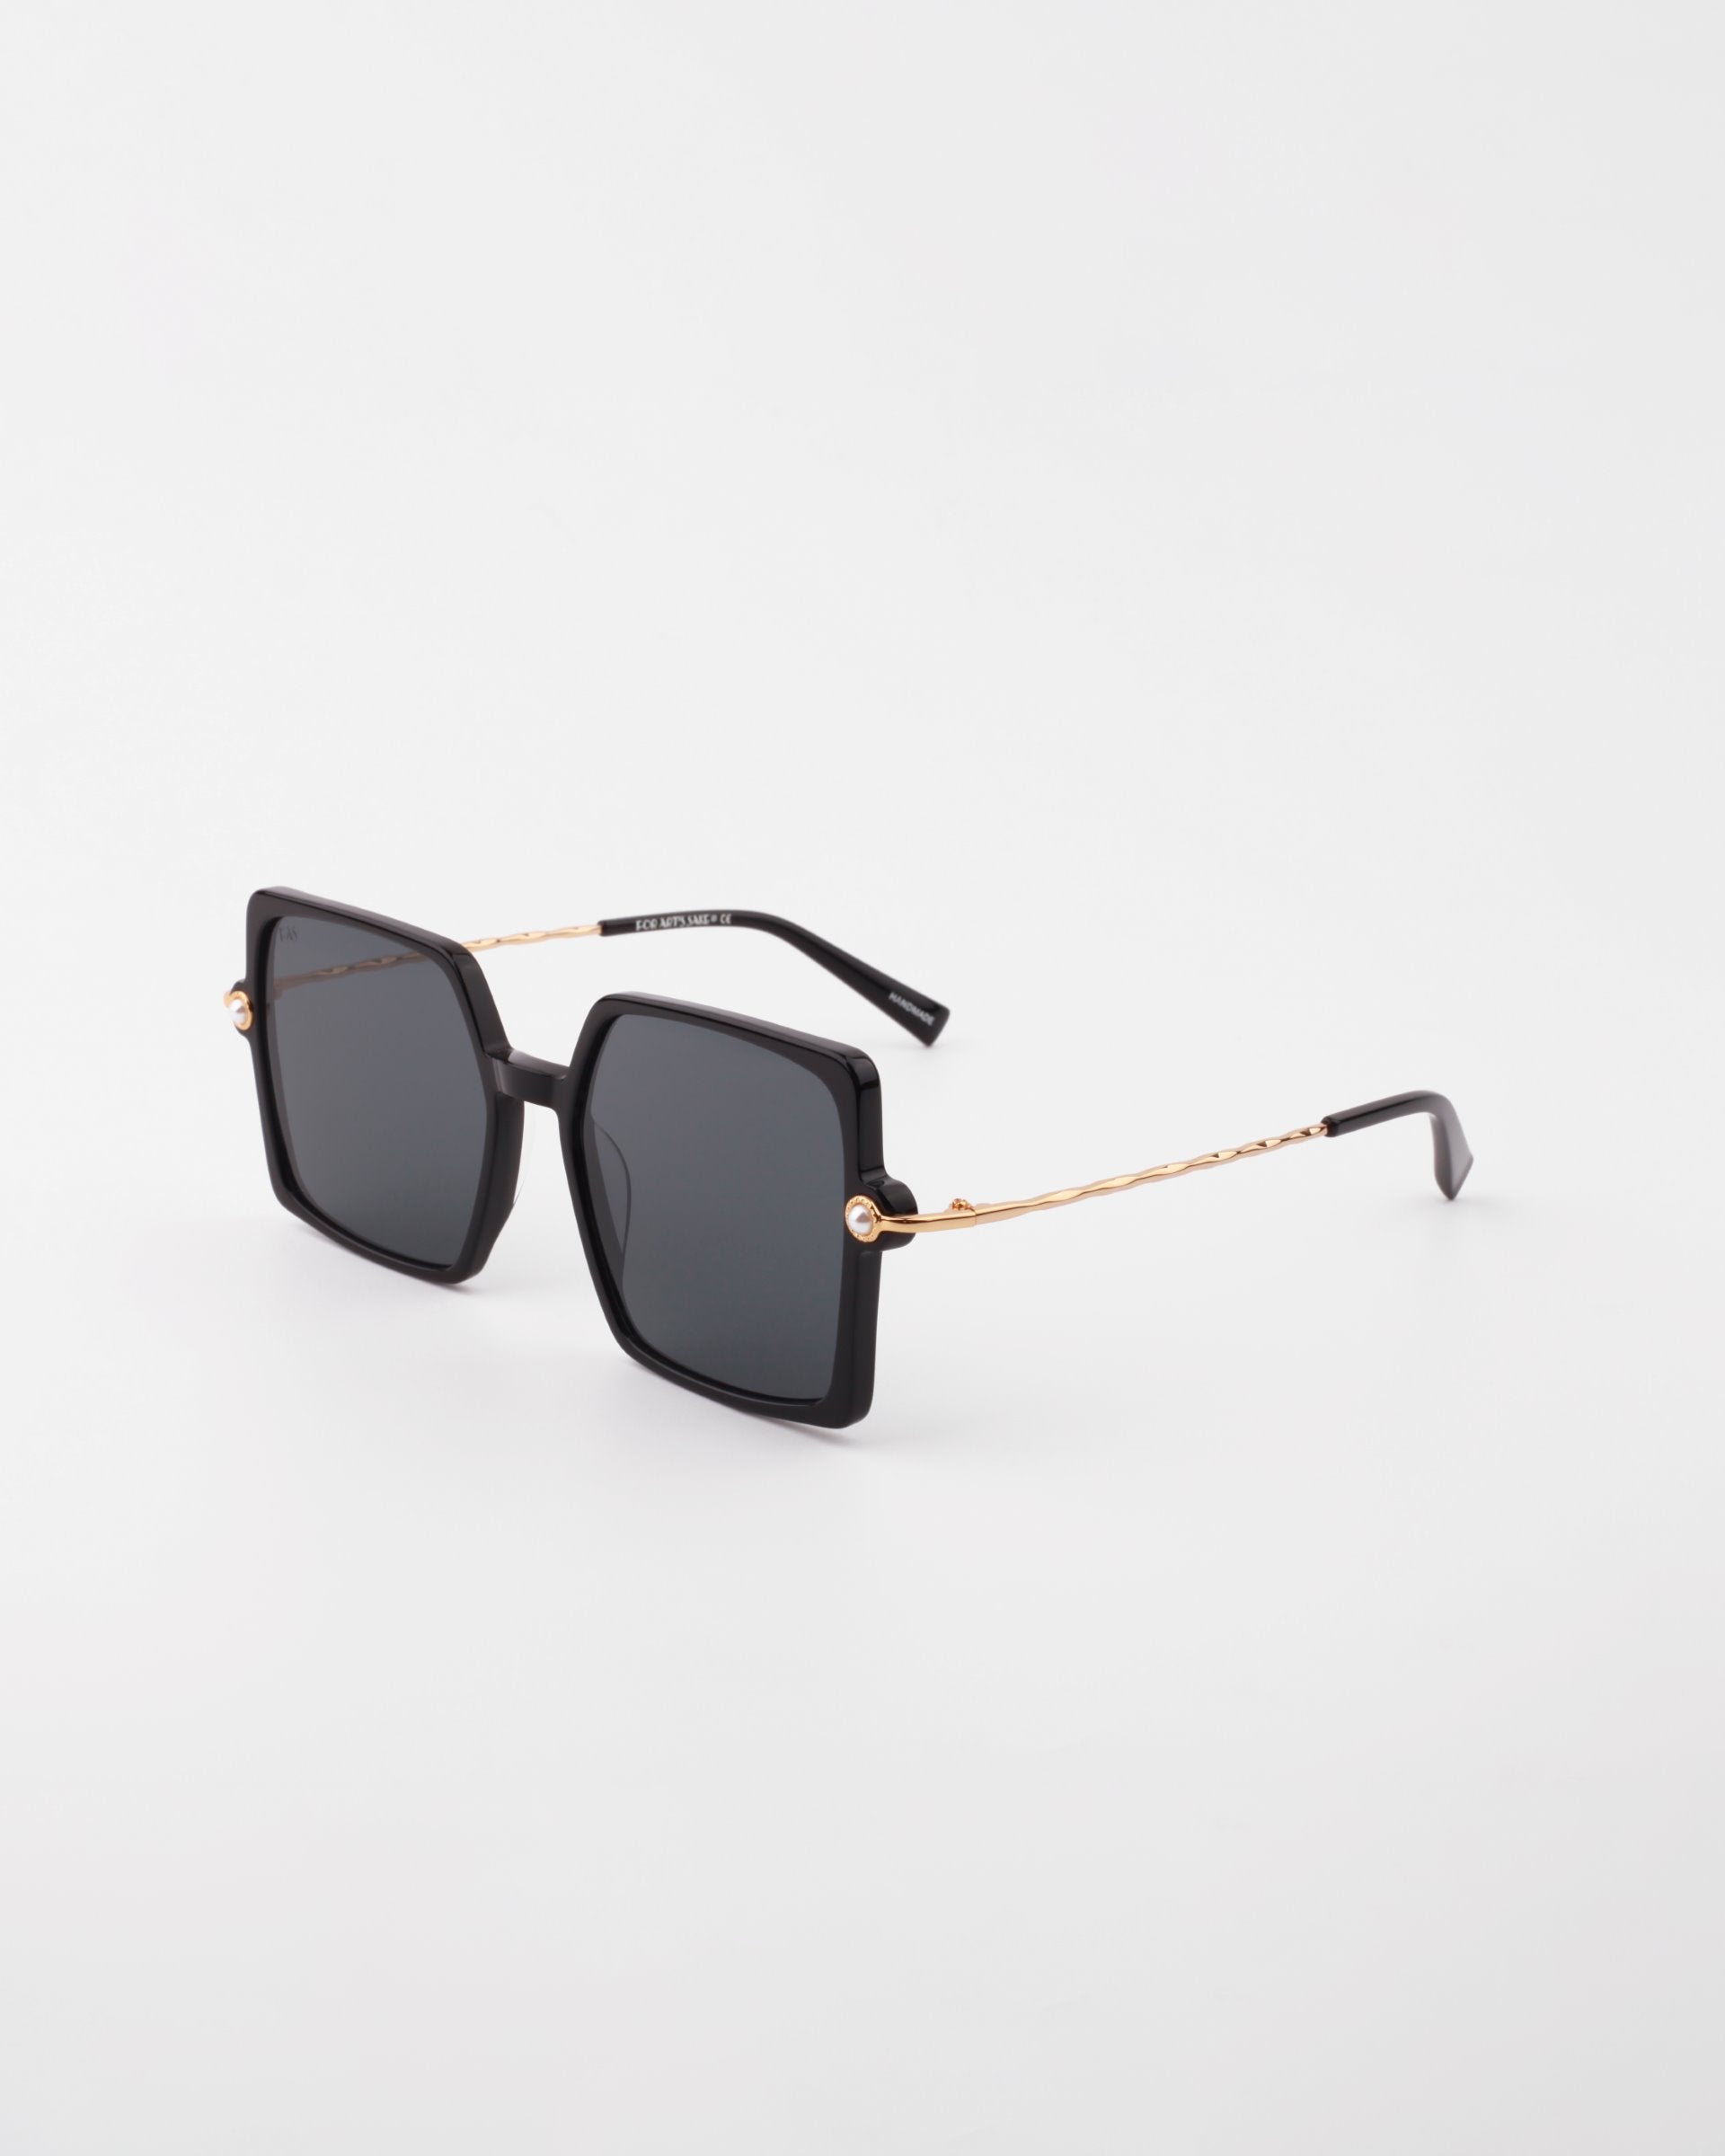 A pair of Moxie by For Art's Sake® black square-shaped handmade acetate sunglasses featuring 18-karat gold-plated arms. The twisted design of the arms leads to black ear tips. Dark lenses provide full UVA & UVB protection, and the sunglasses are photographed against a white background.